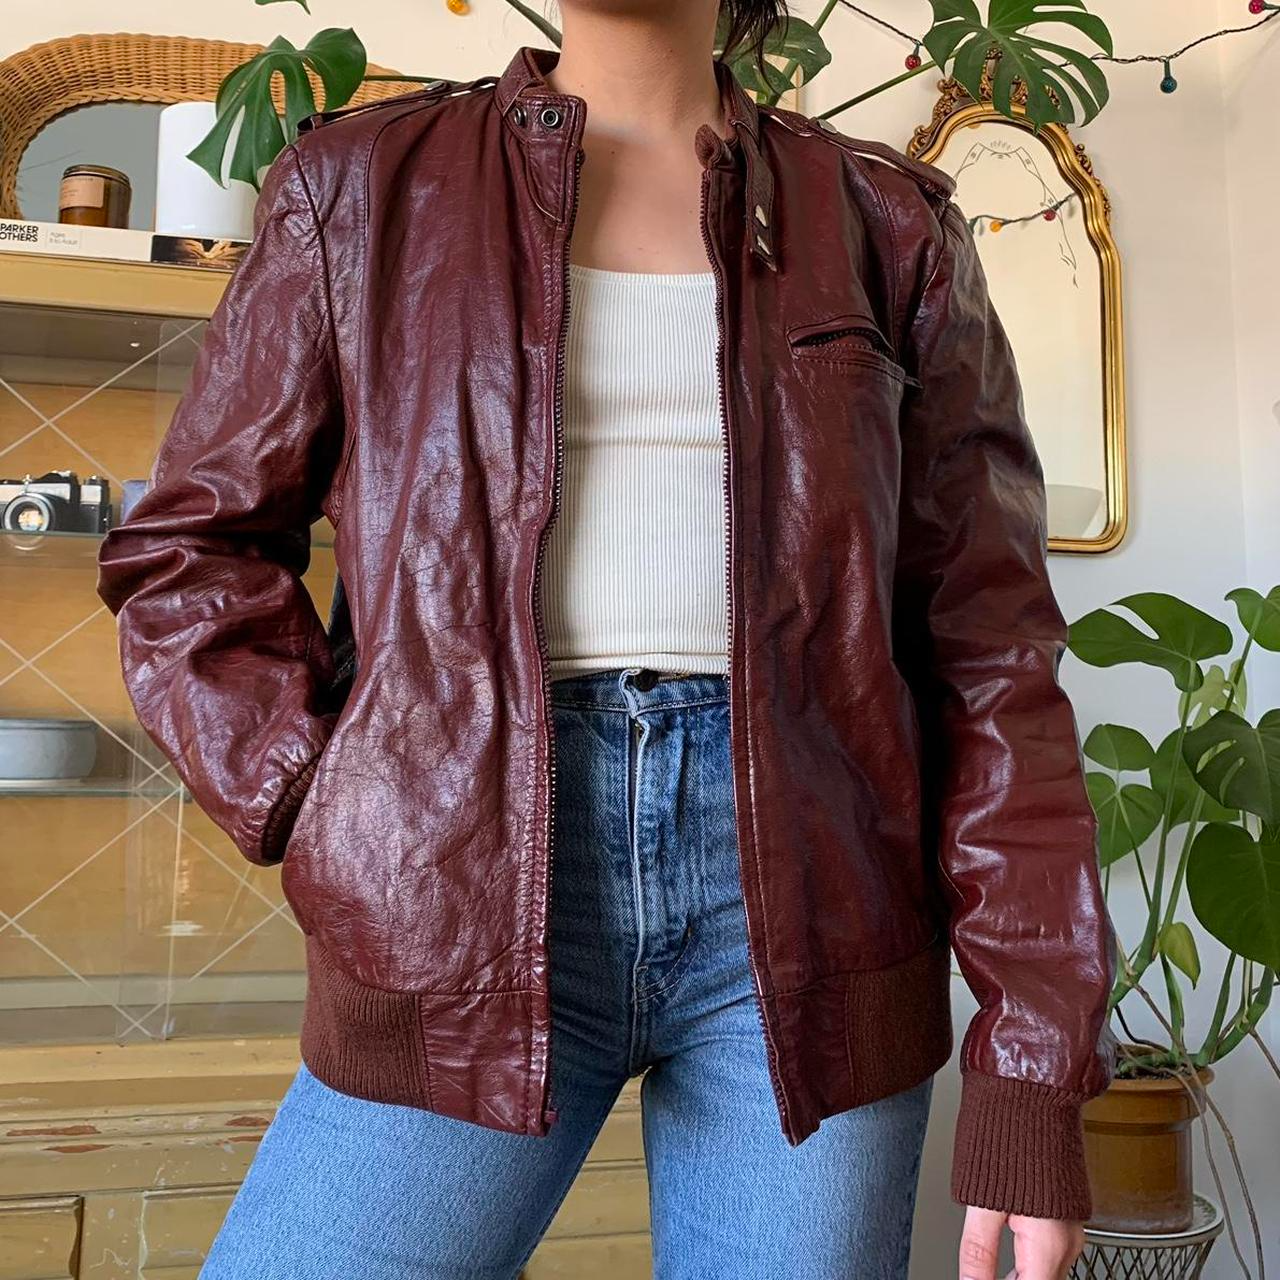 Burgundy Leather Jacket Outfit
  Ideas for Women